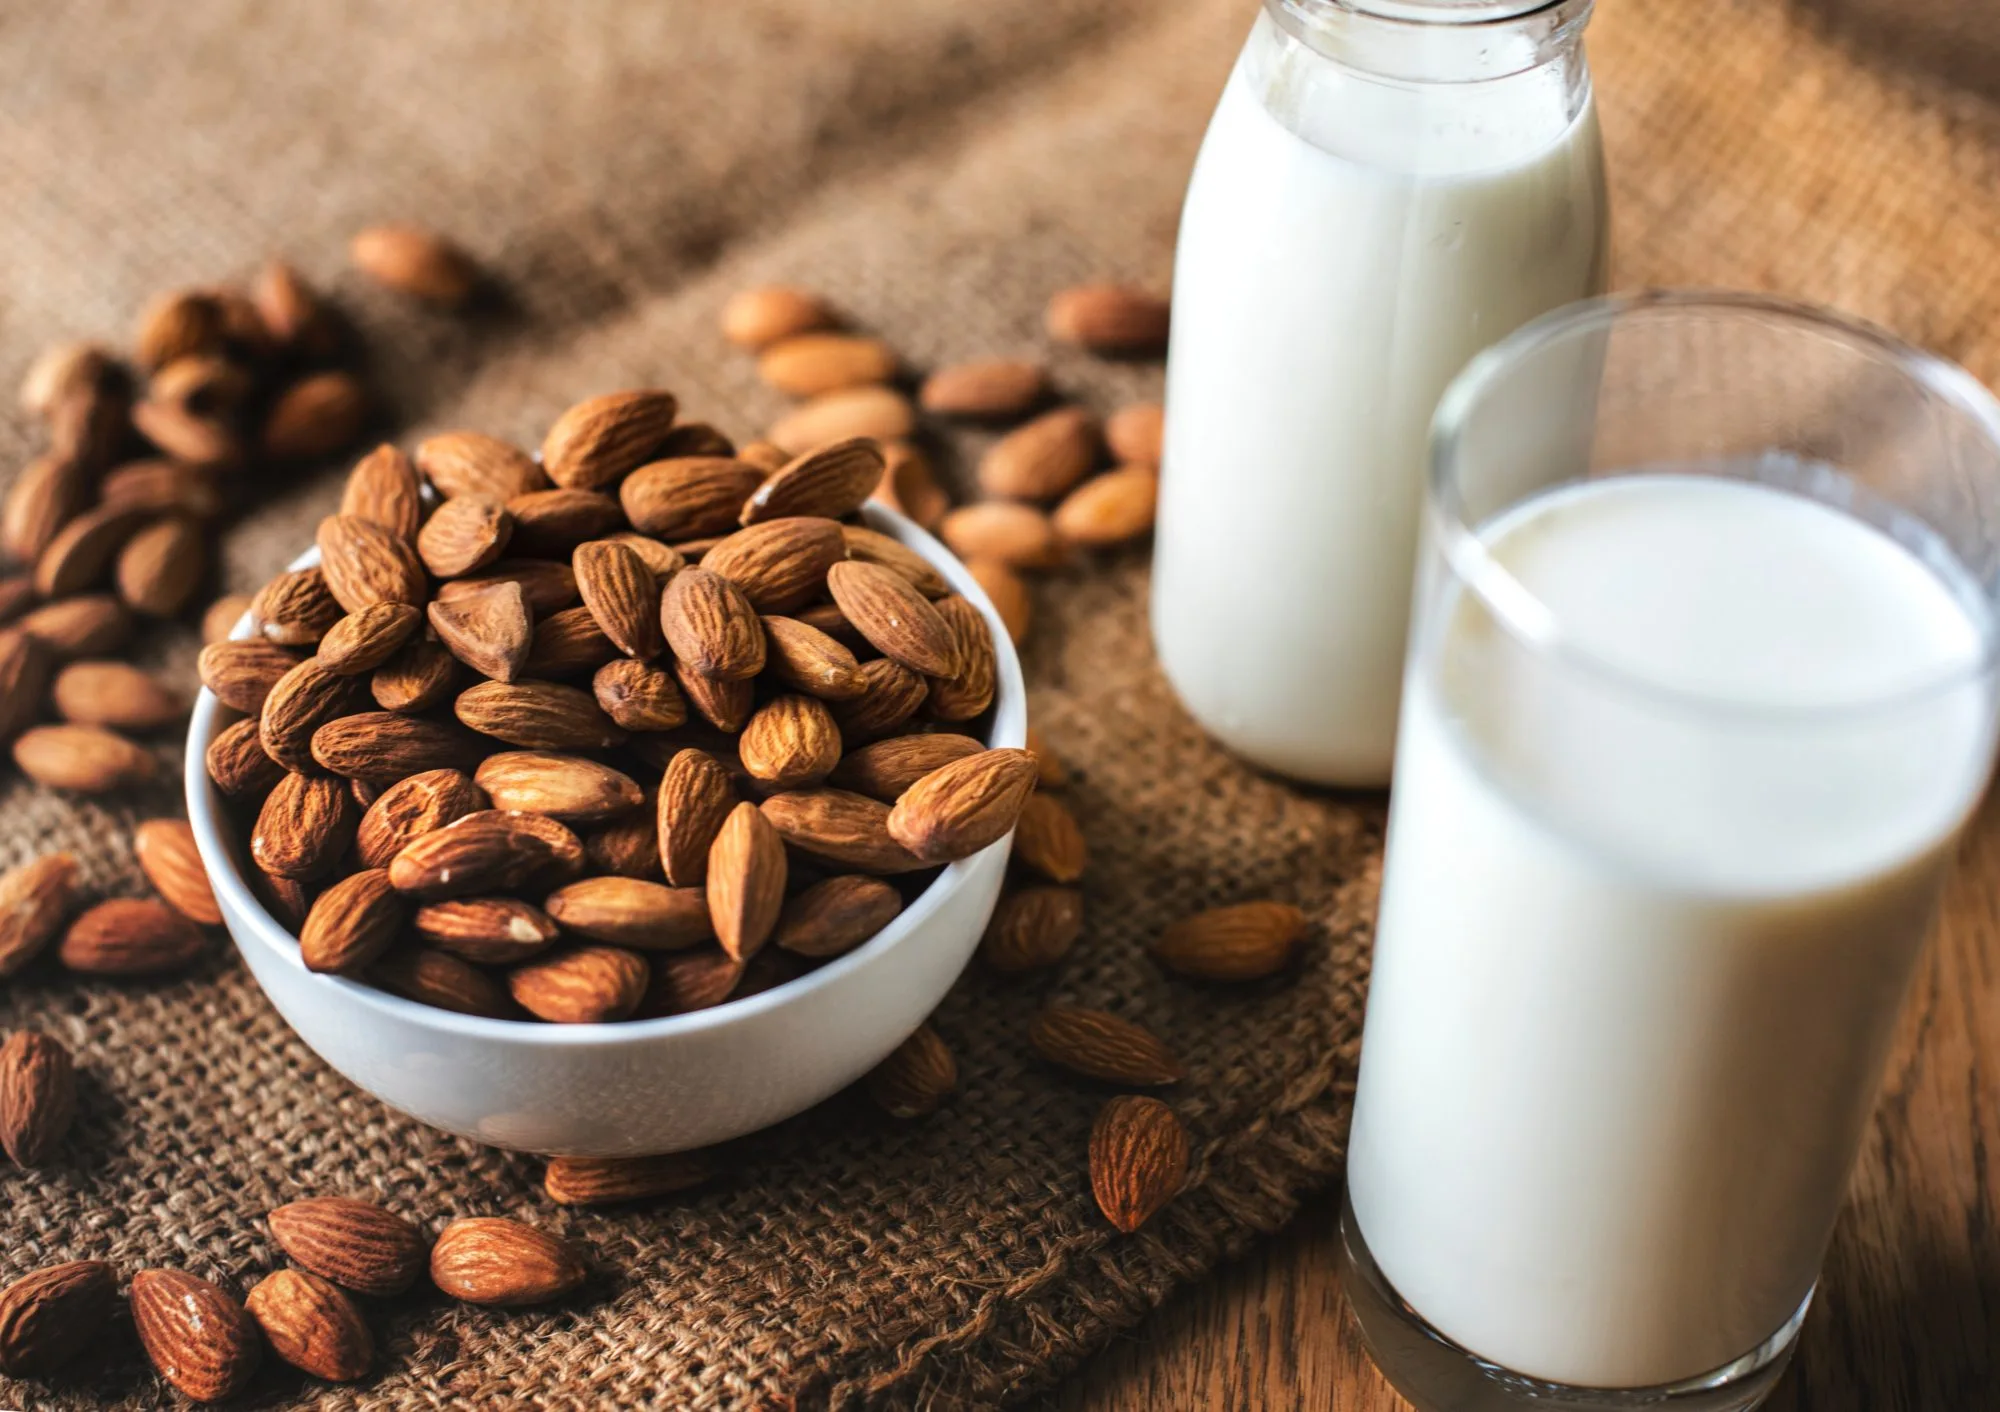 Trendy Almond Milk And Why It’s Better For Your Health